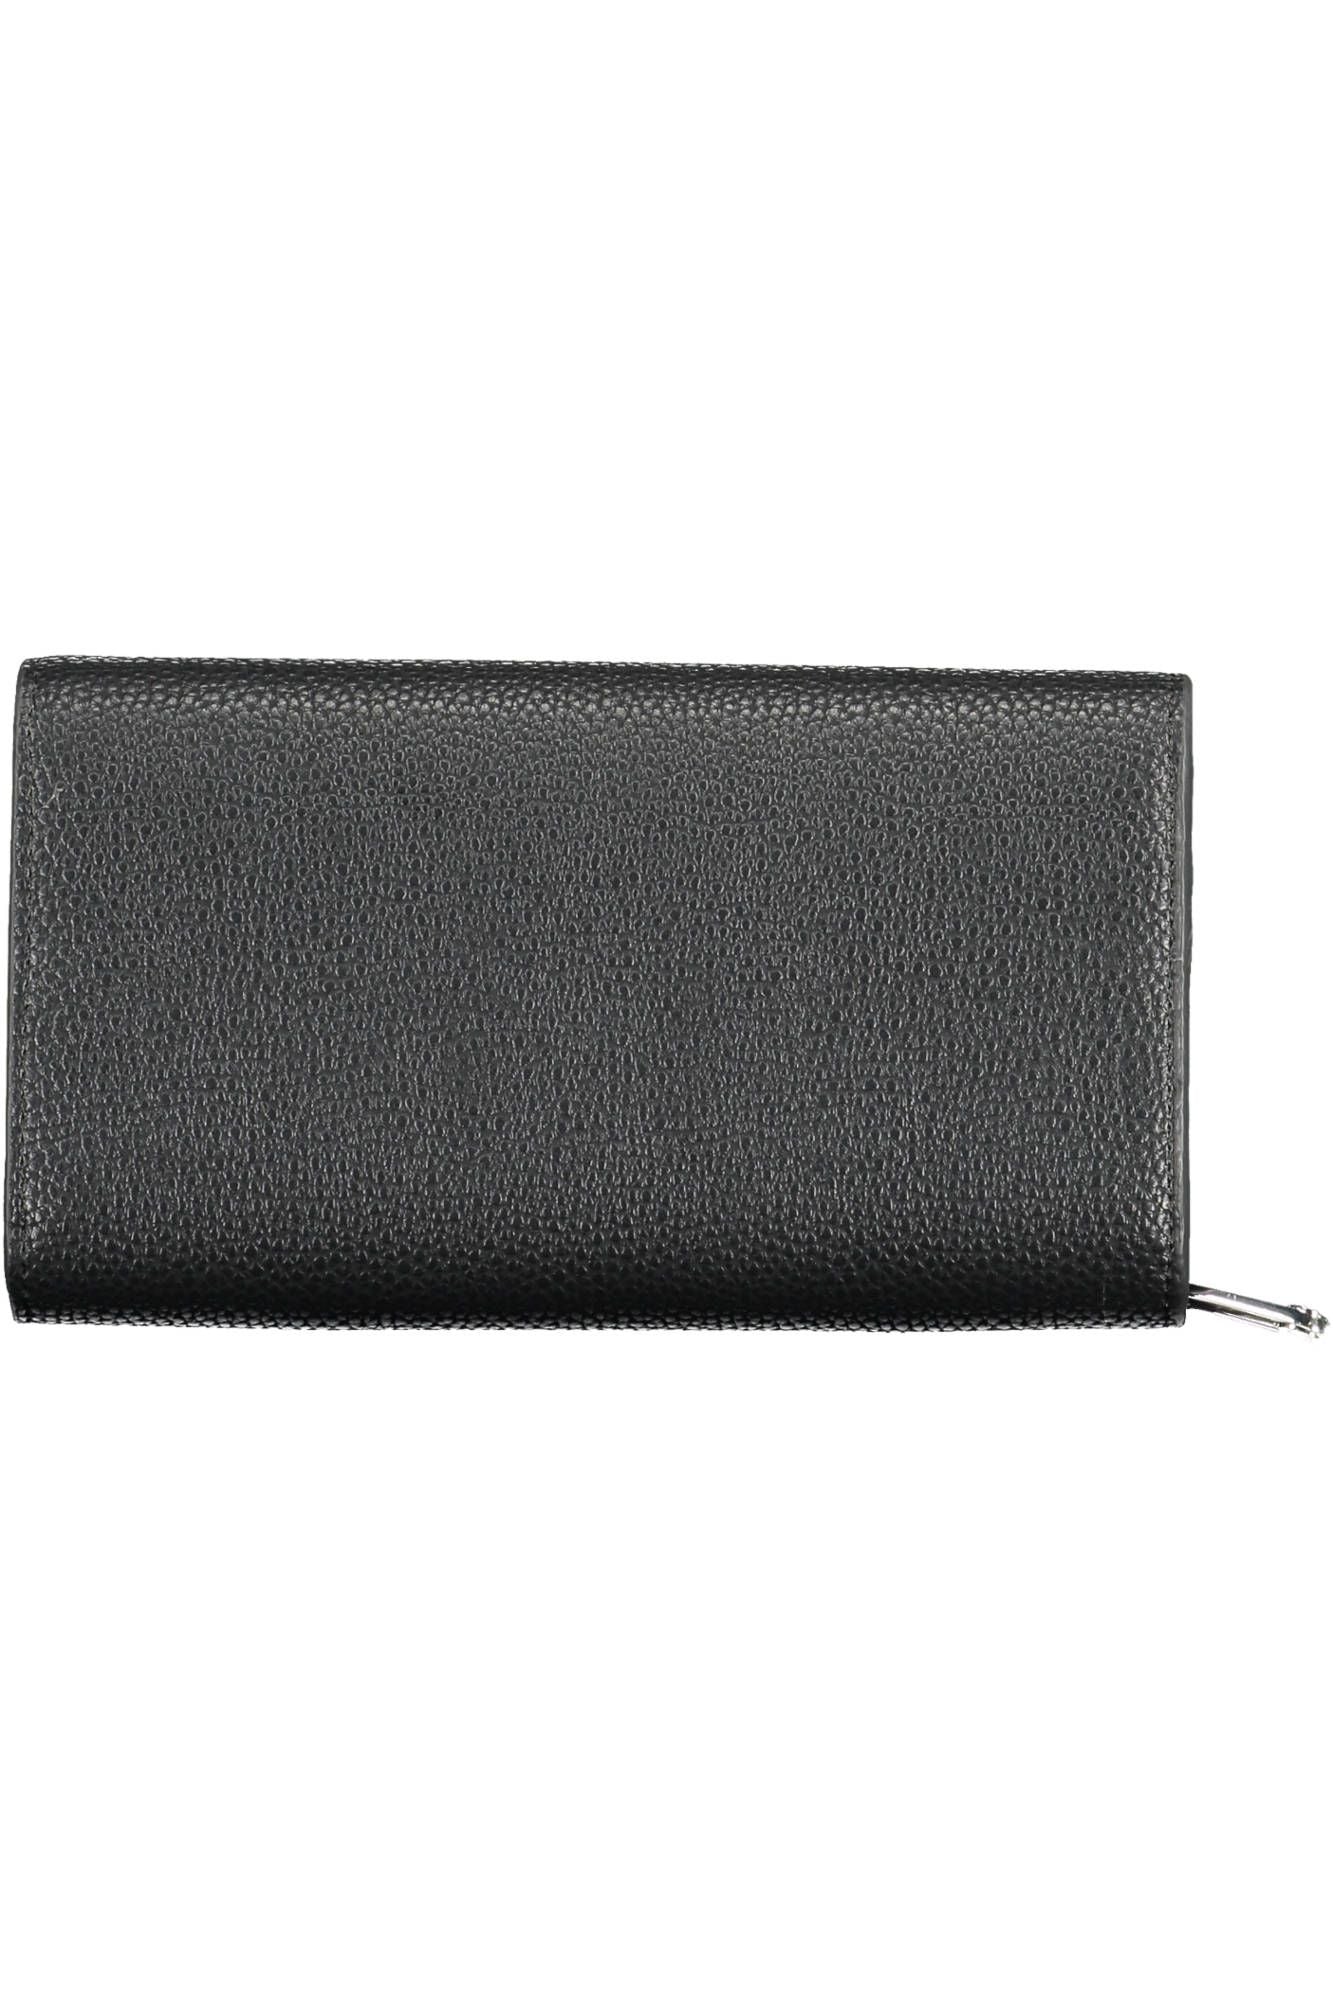 Chic Black Polyurethane Wallet with Coin Purse